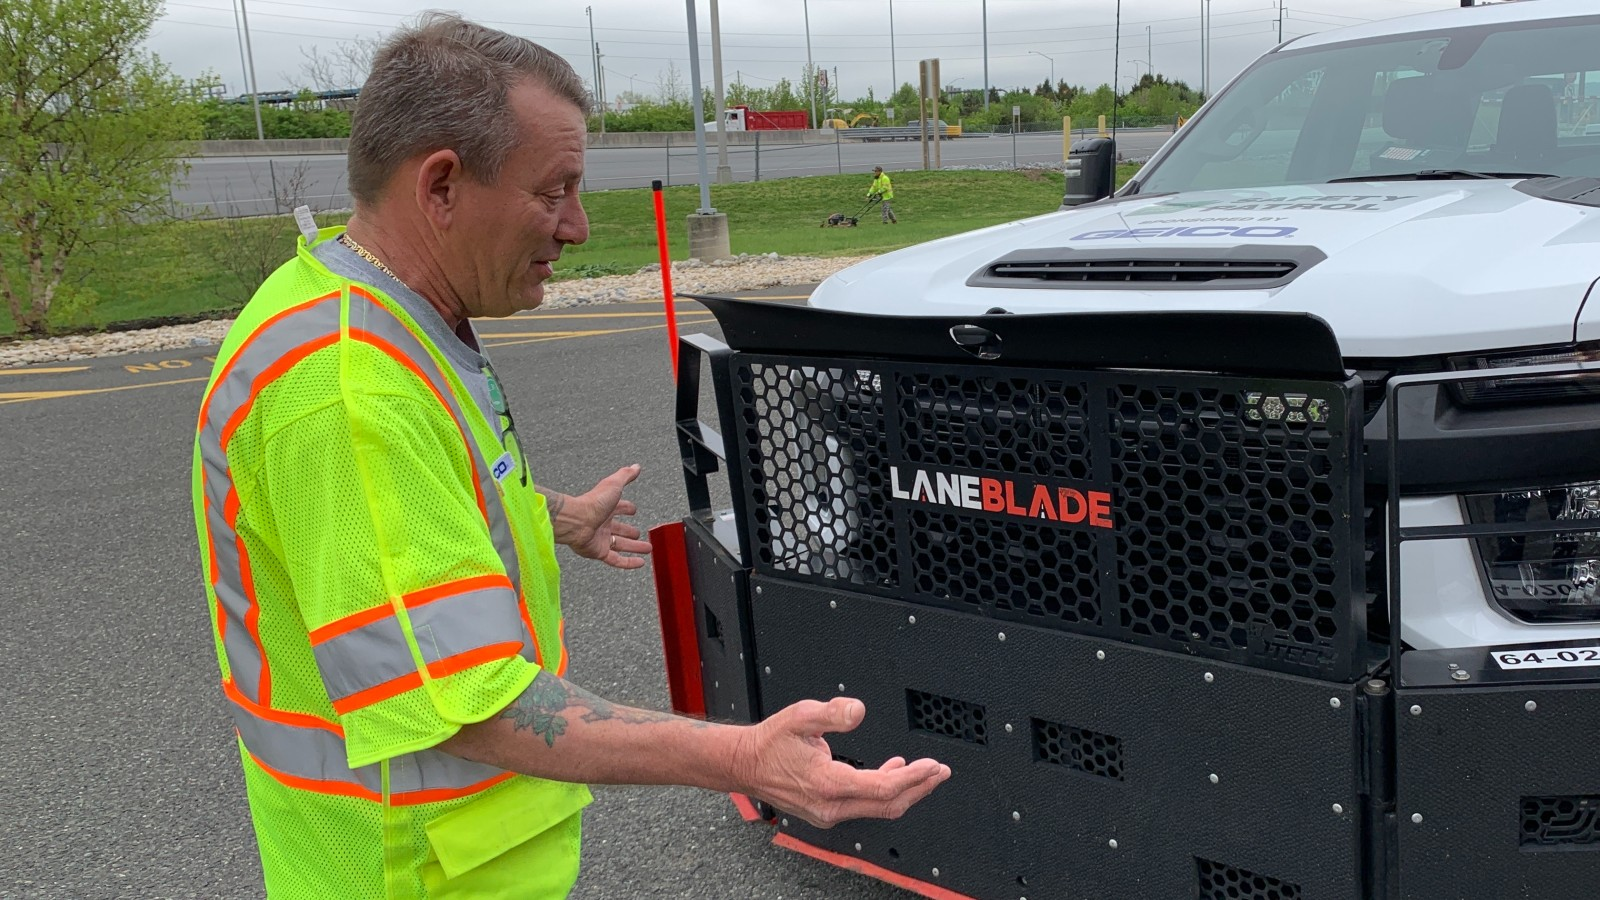 Pa. Turnpike debris cleanup made safer due to ‘LaneBlade’ technology